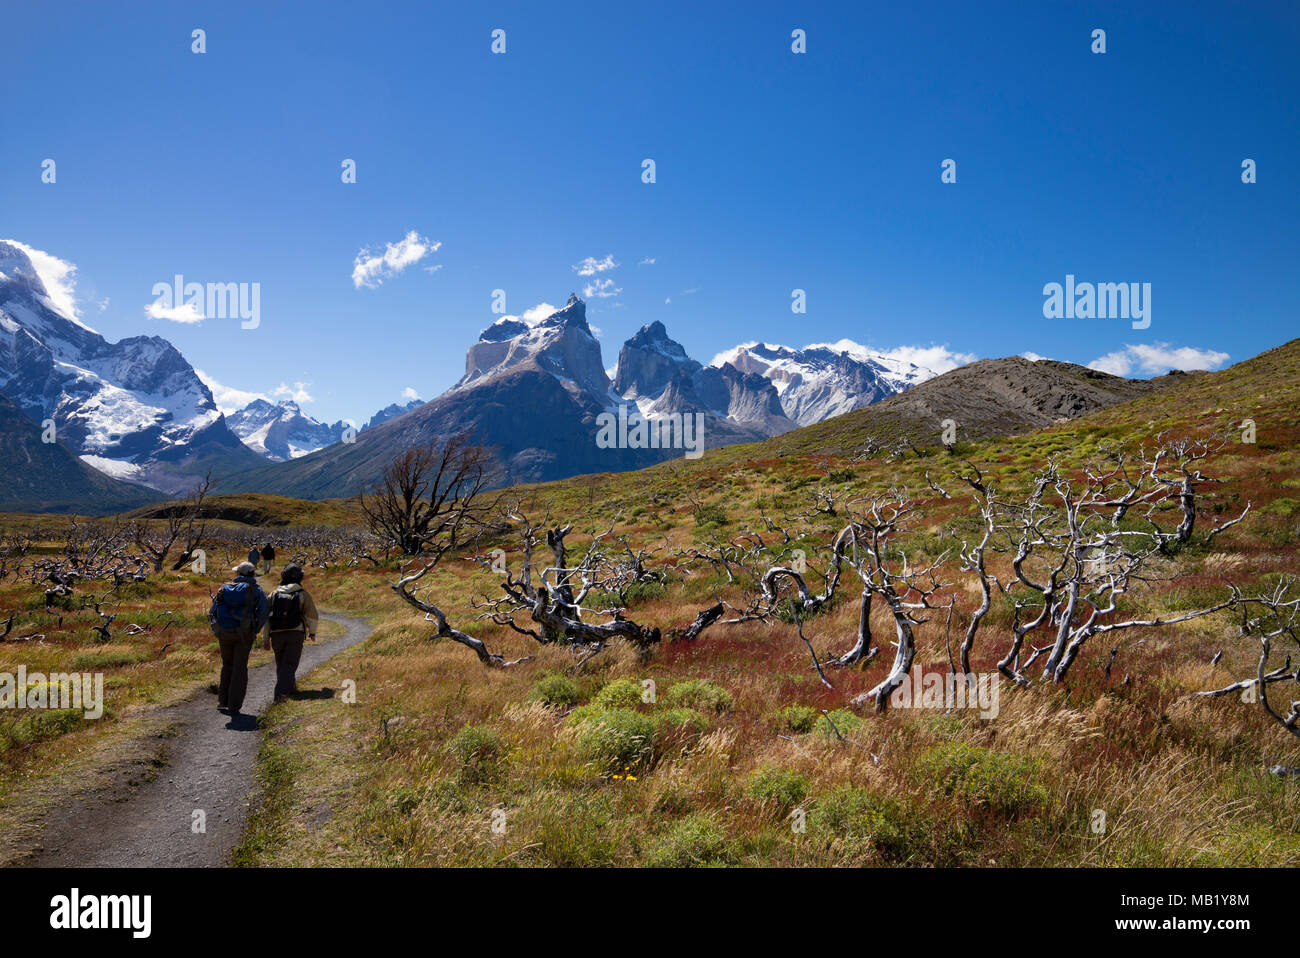 Hikers in Torres del Paine national park, Patagonia, Chile. Stock Photo